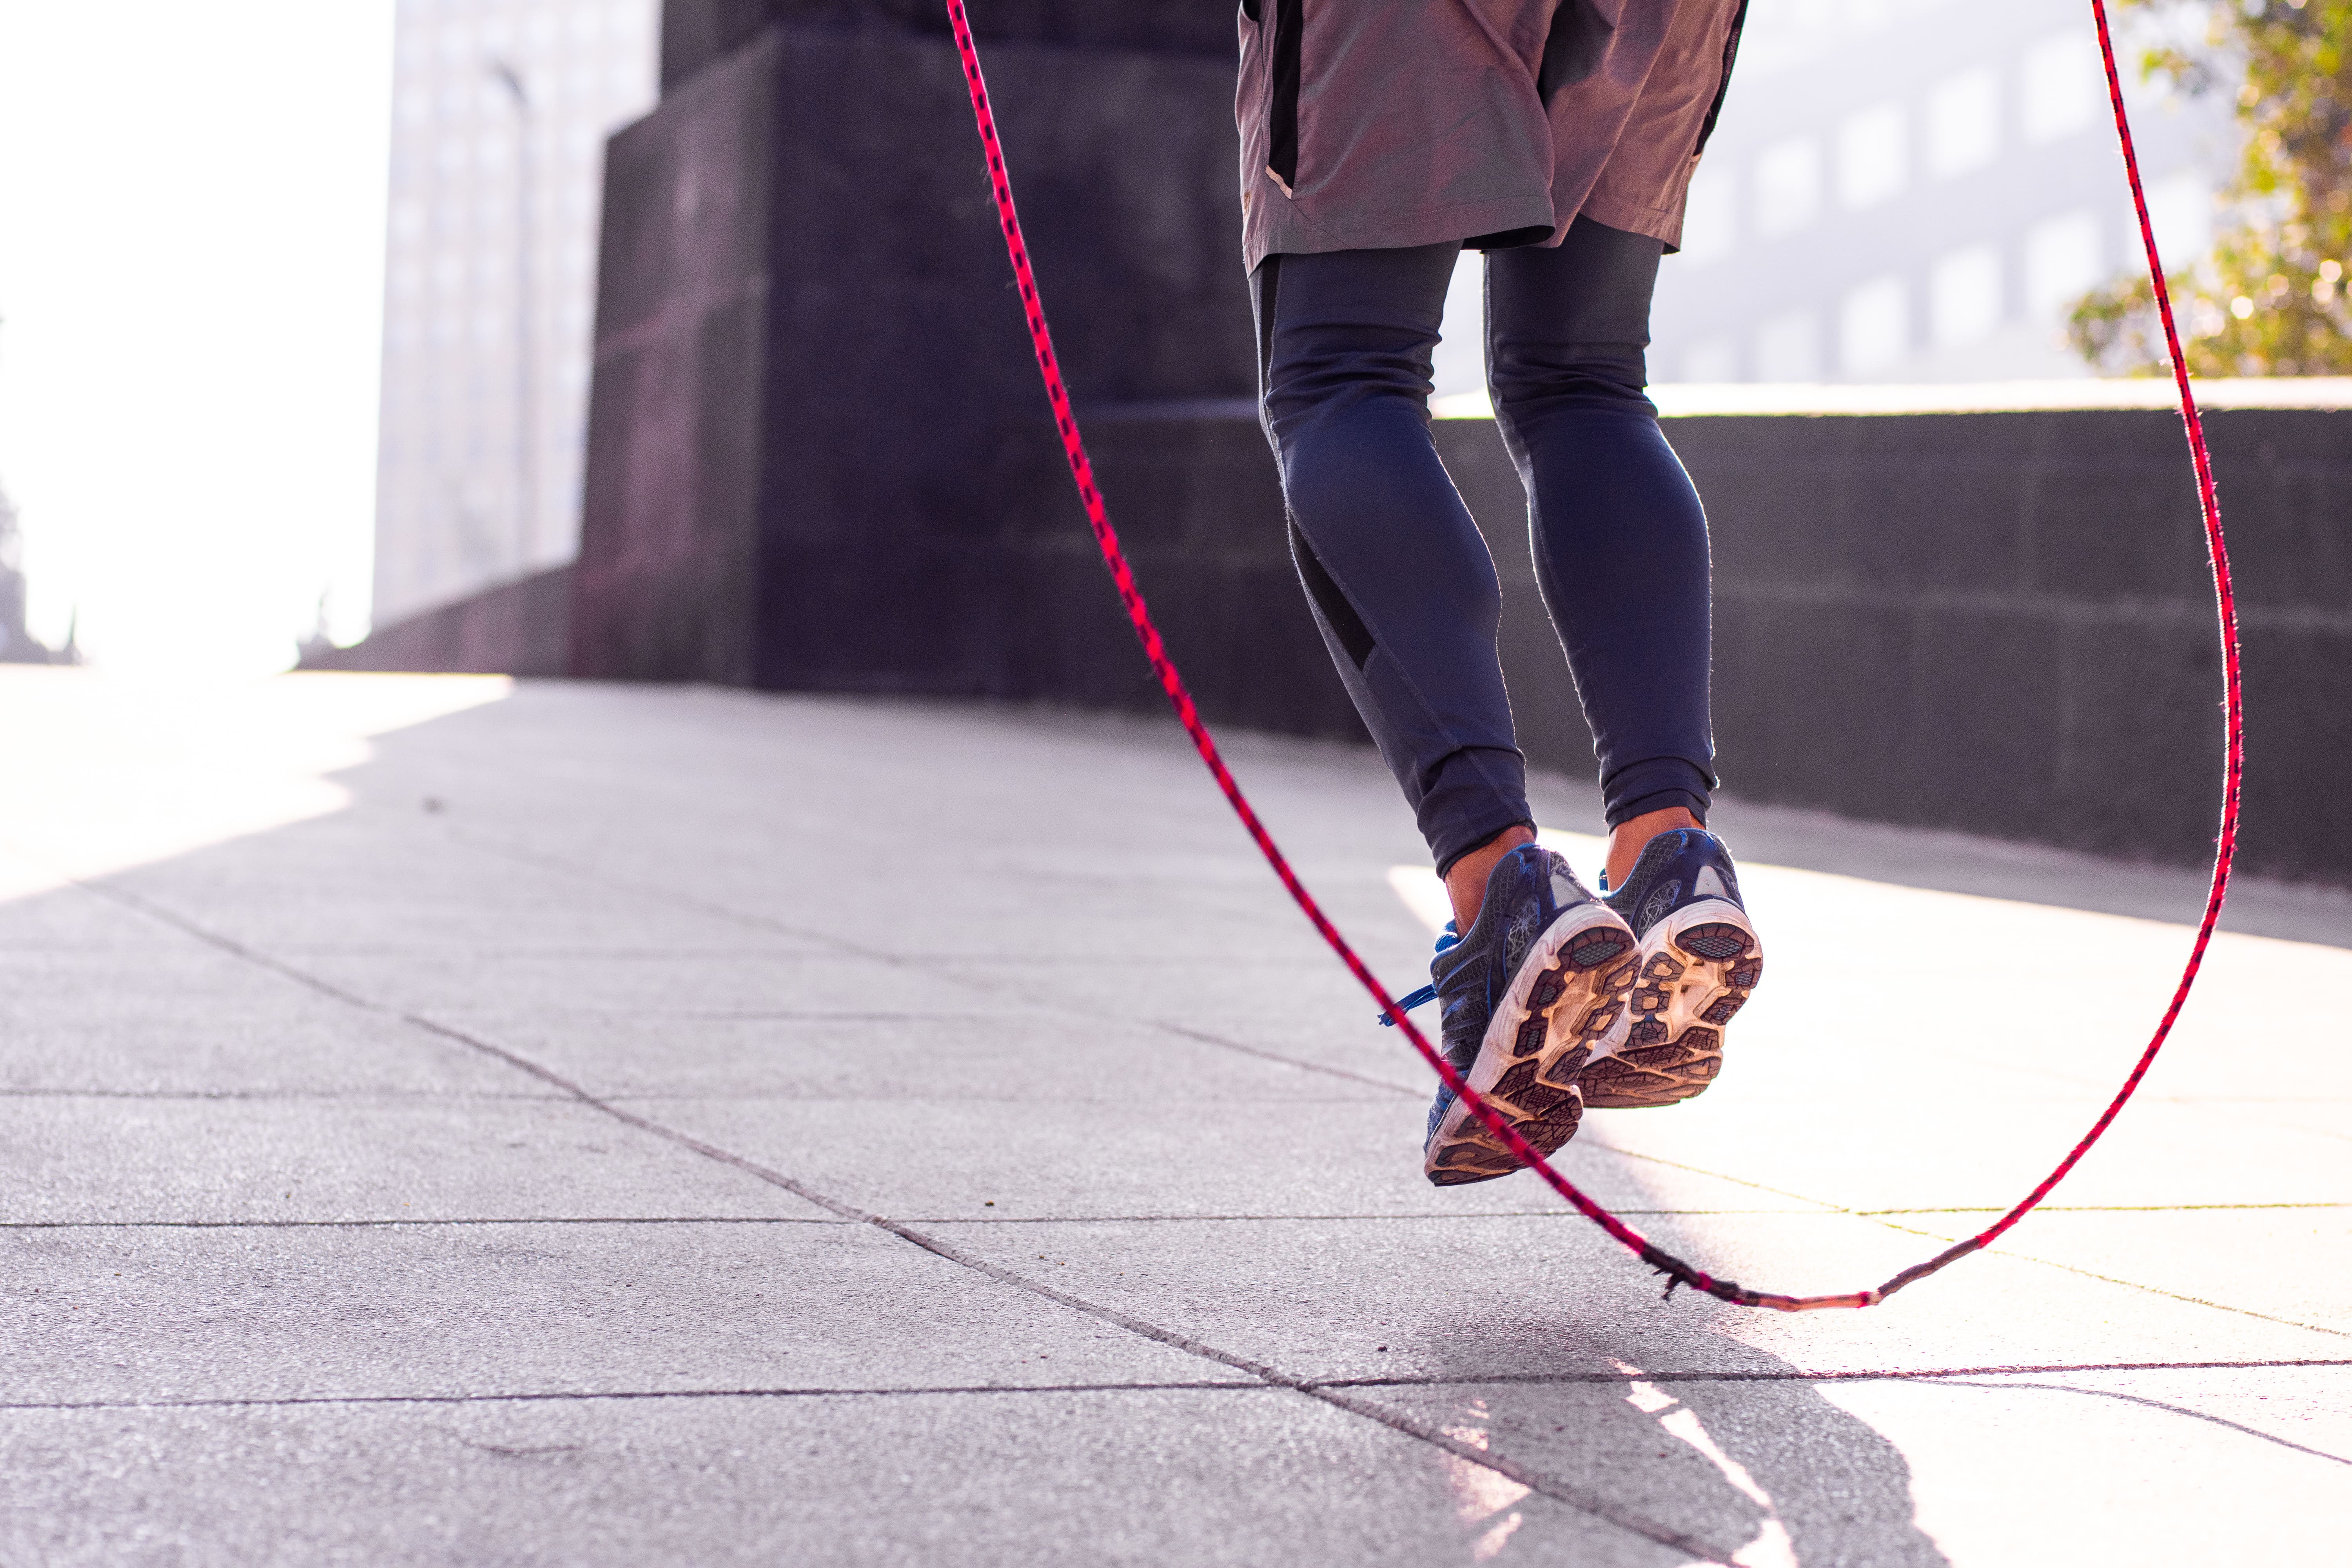 Can You Slim Your Thighs by Jumping Rope?